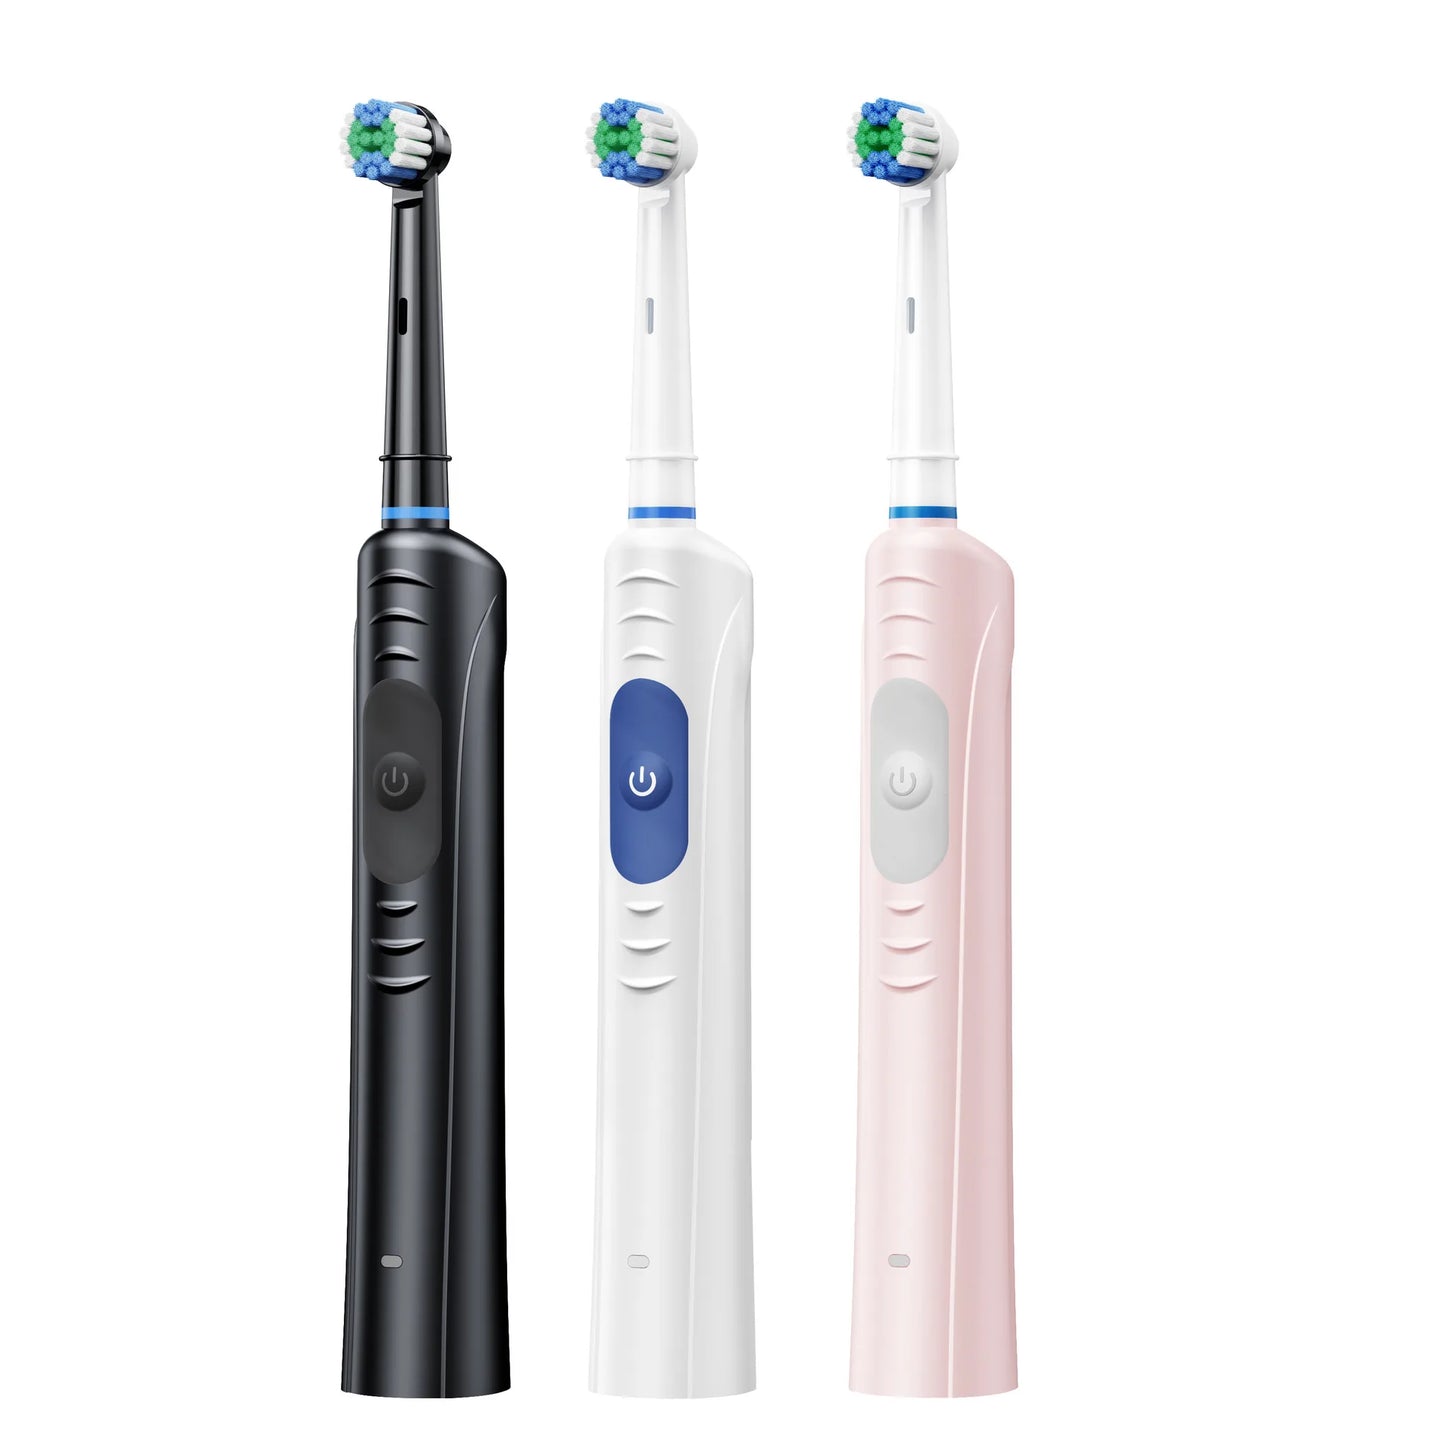 Intelligent fully automatic electric toothbrush for whiter teeth